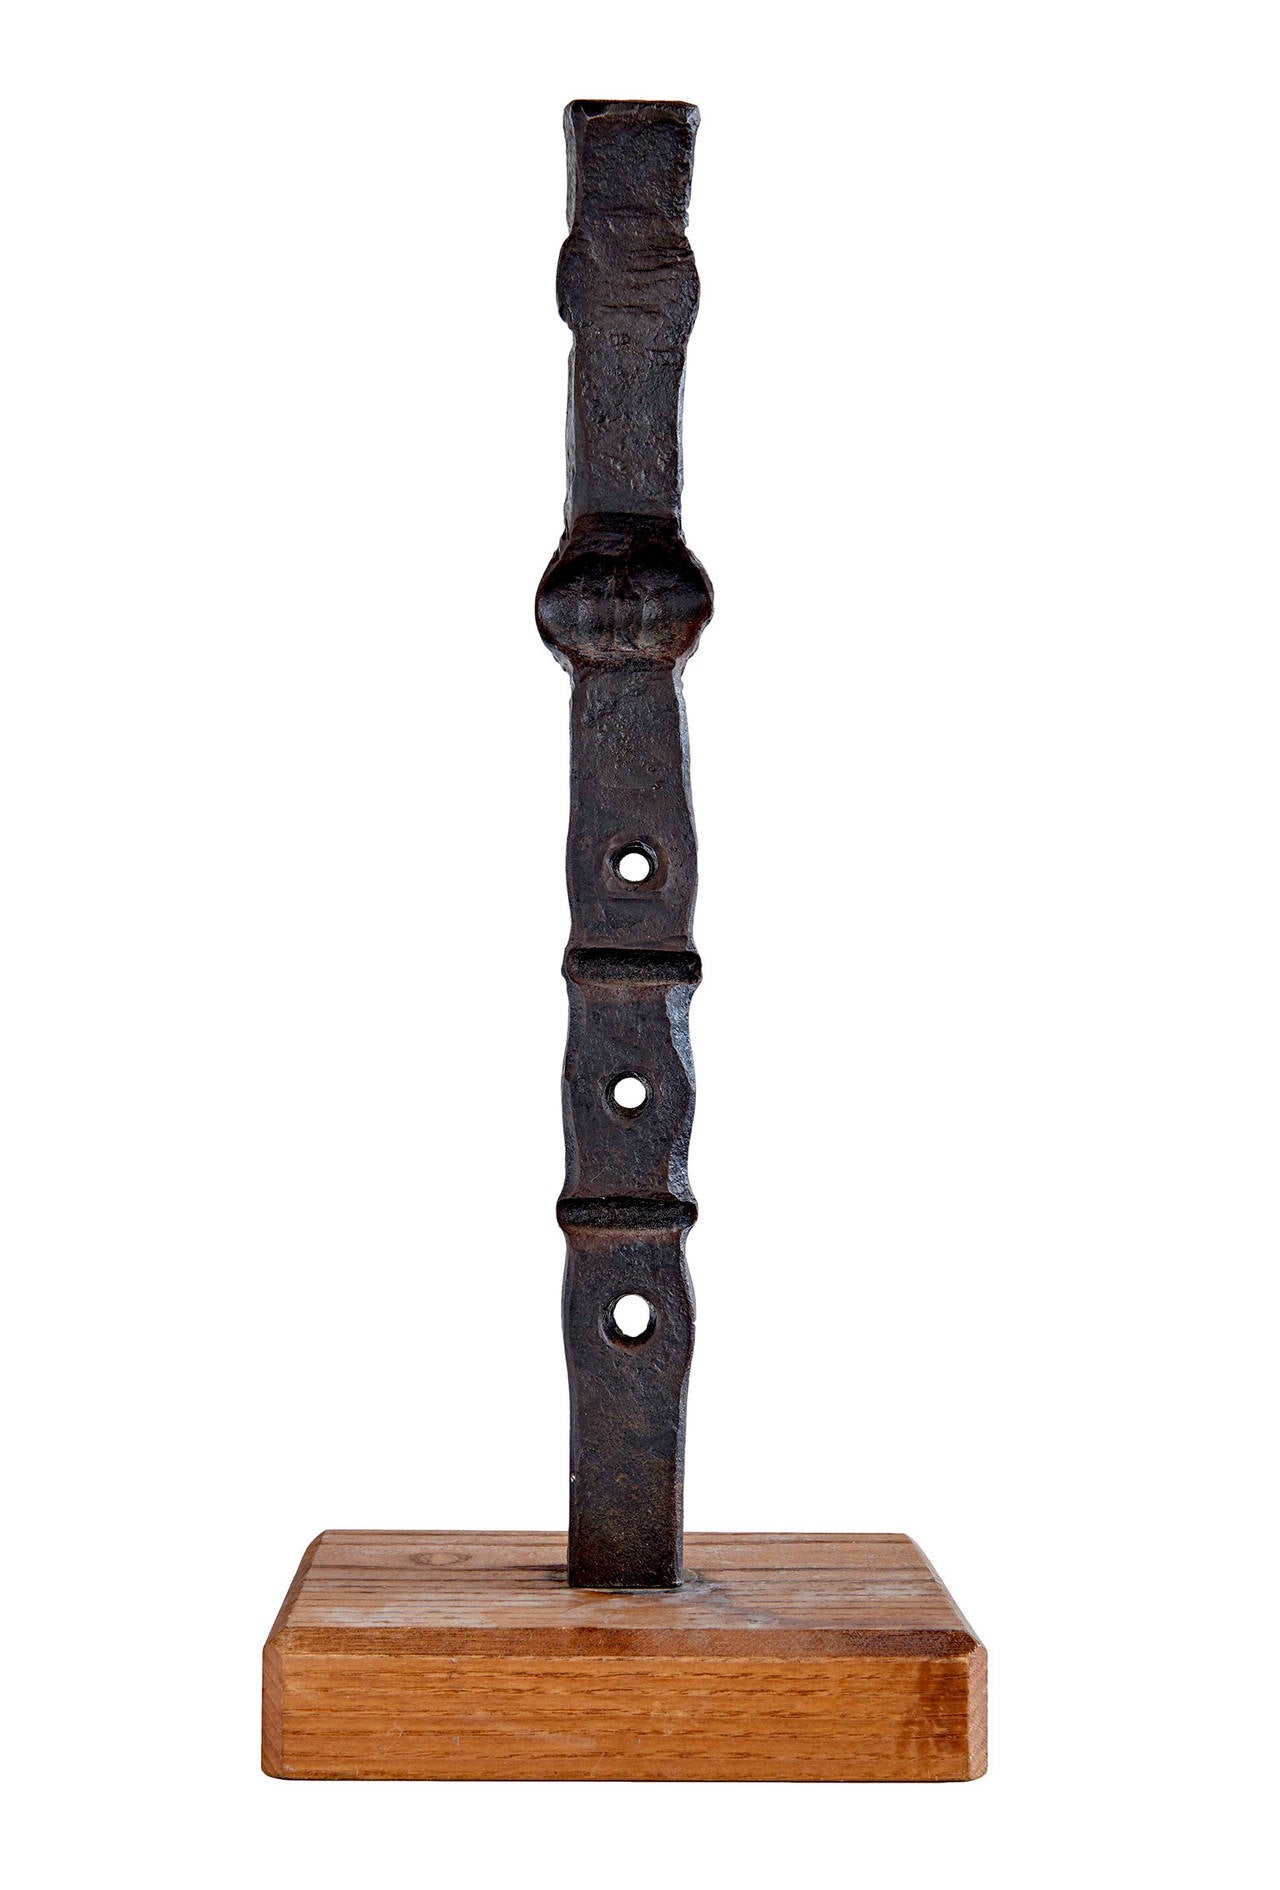 A tall, square section rod of steel, hammered by hot forging into a totemic sculpture of not inconsiderable presence and power. Forging steel is an intensely physical process that recalls the ancient origins of art in tool-making. Mounted on a